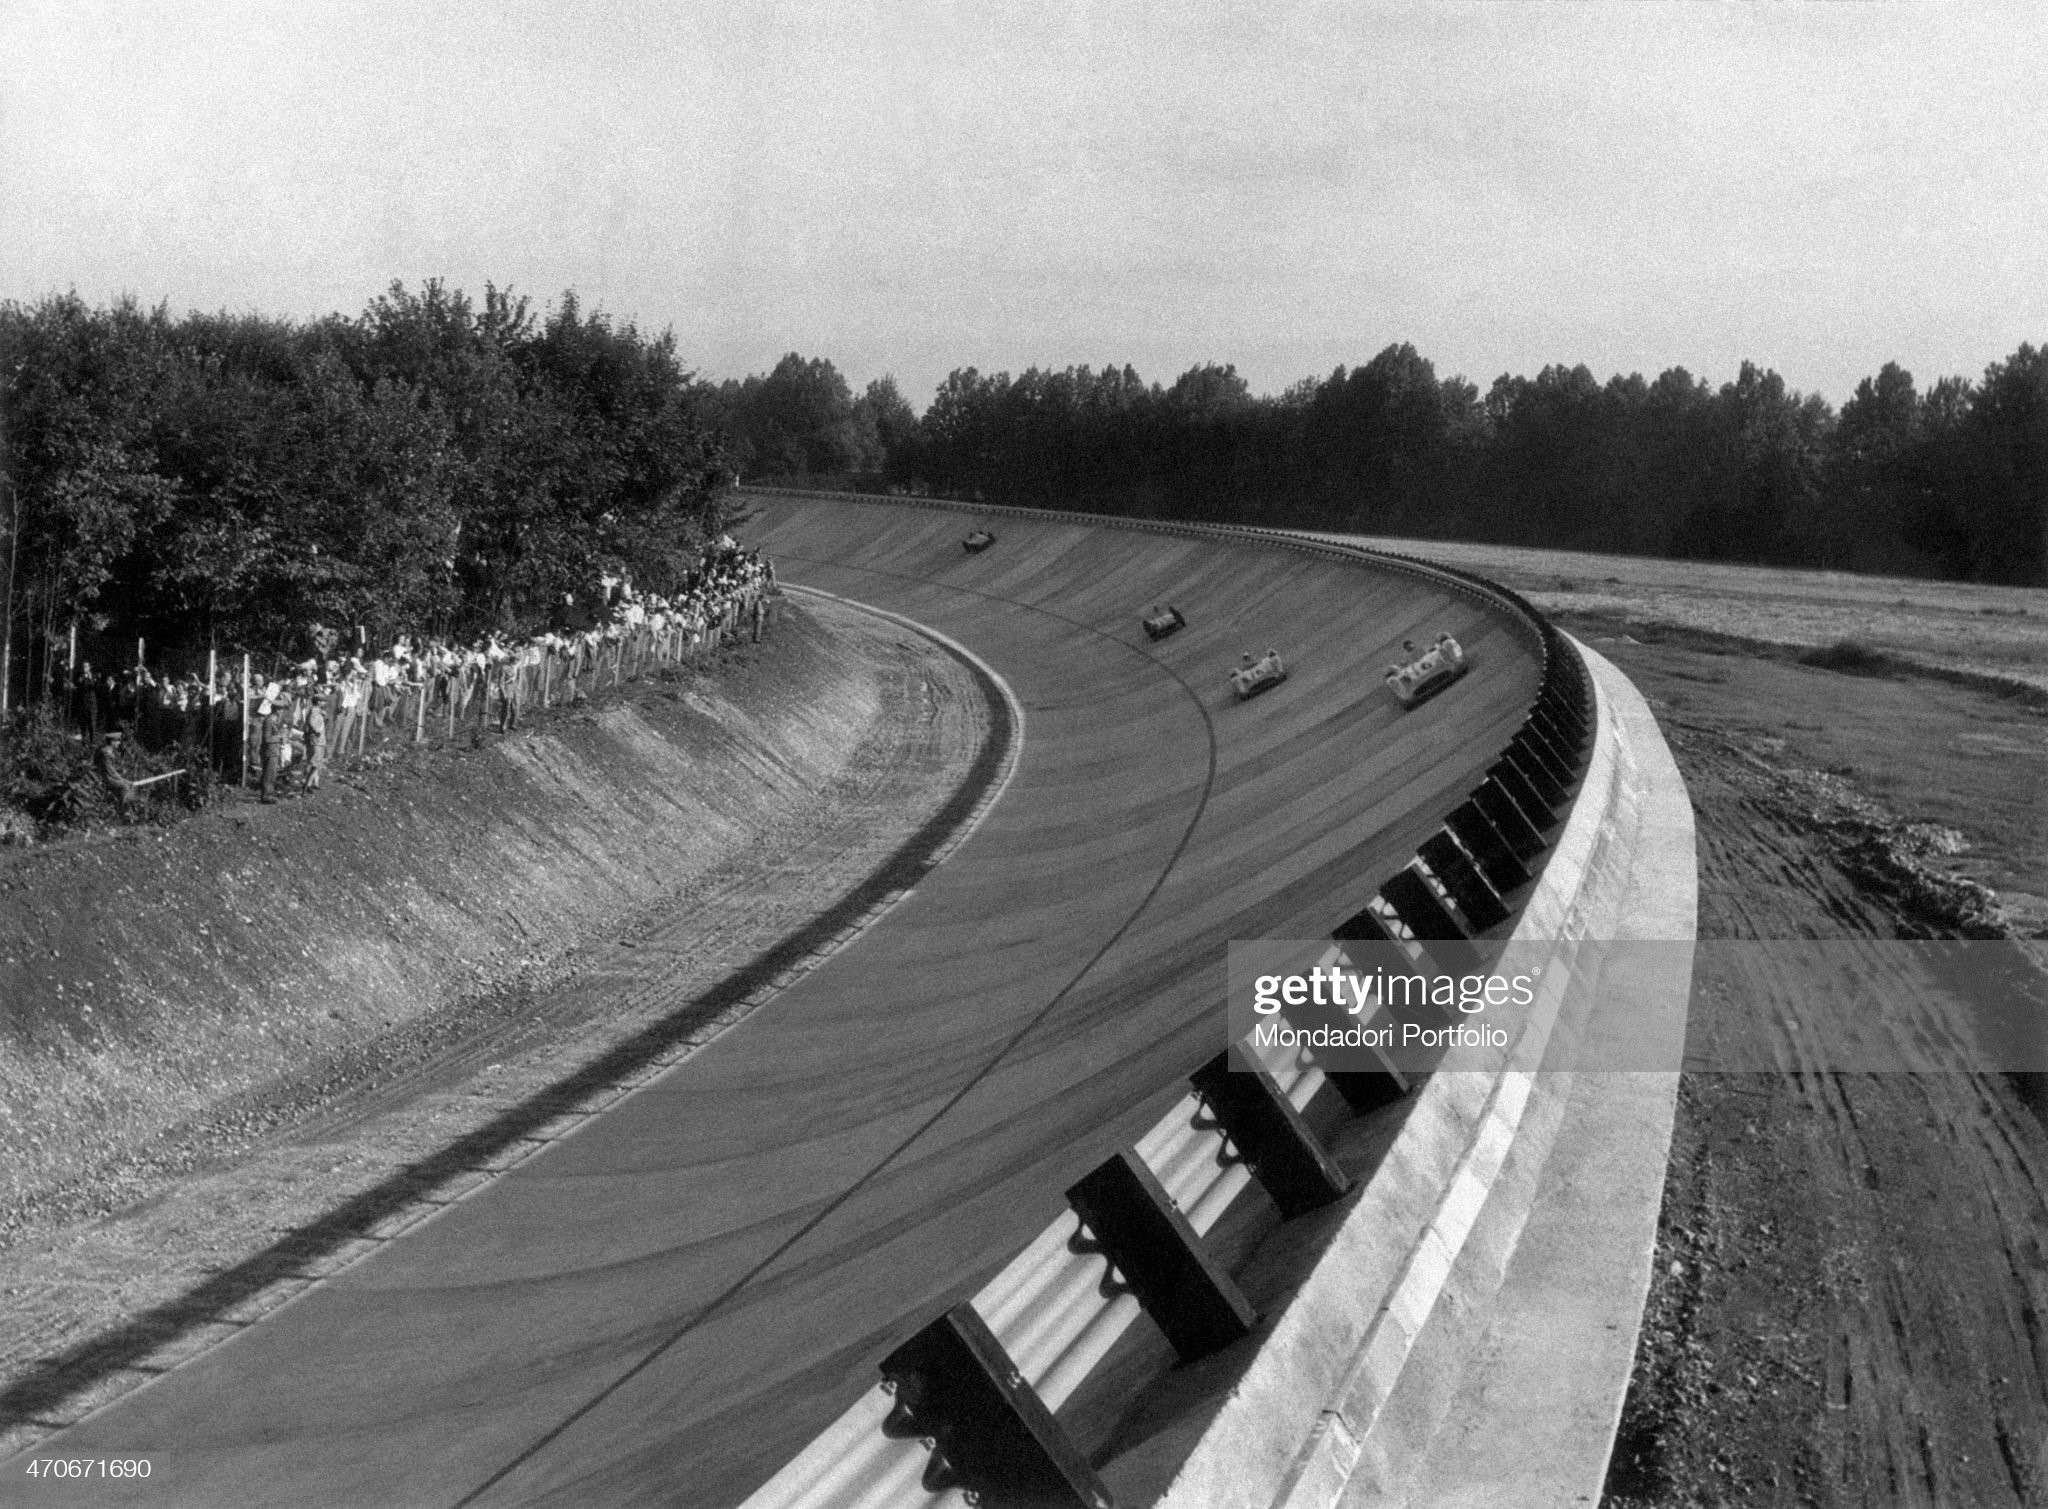 A banked curve at autodromo di Monza with 4 cars racing.